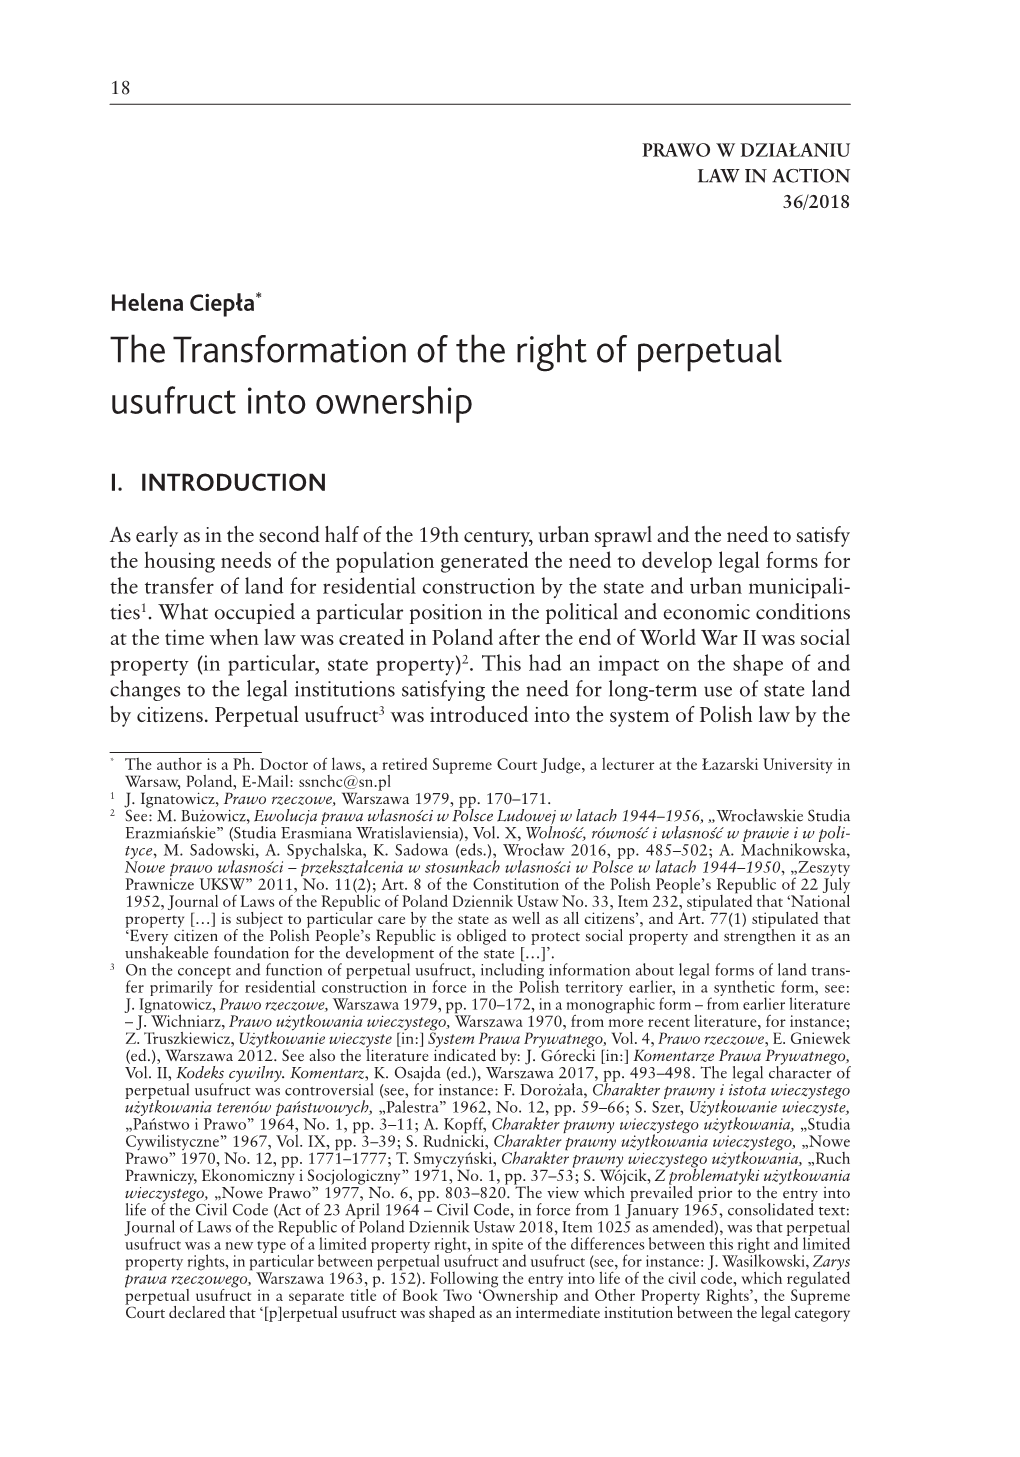 The Transformation of the Right of Perpetual Usufruct Into Ownership